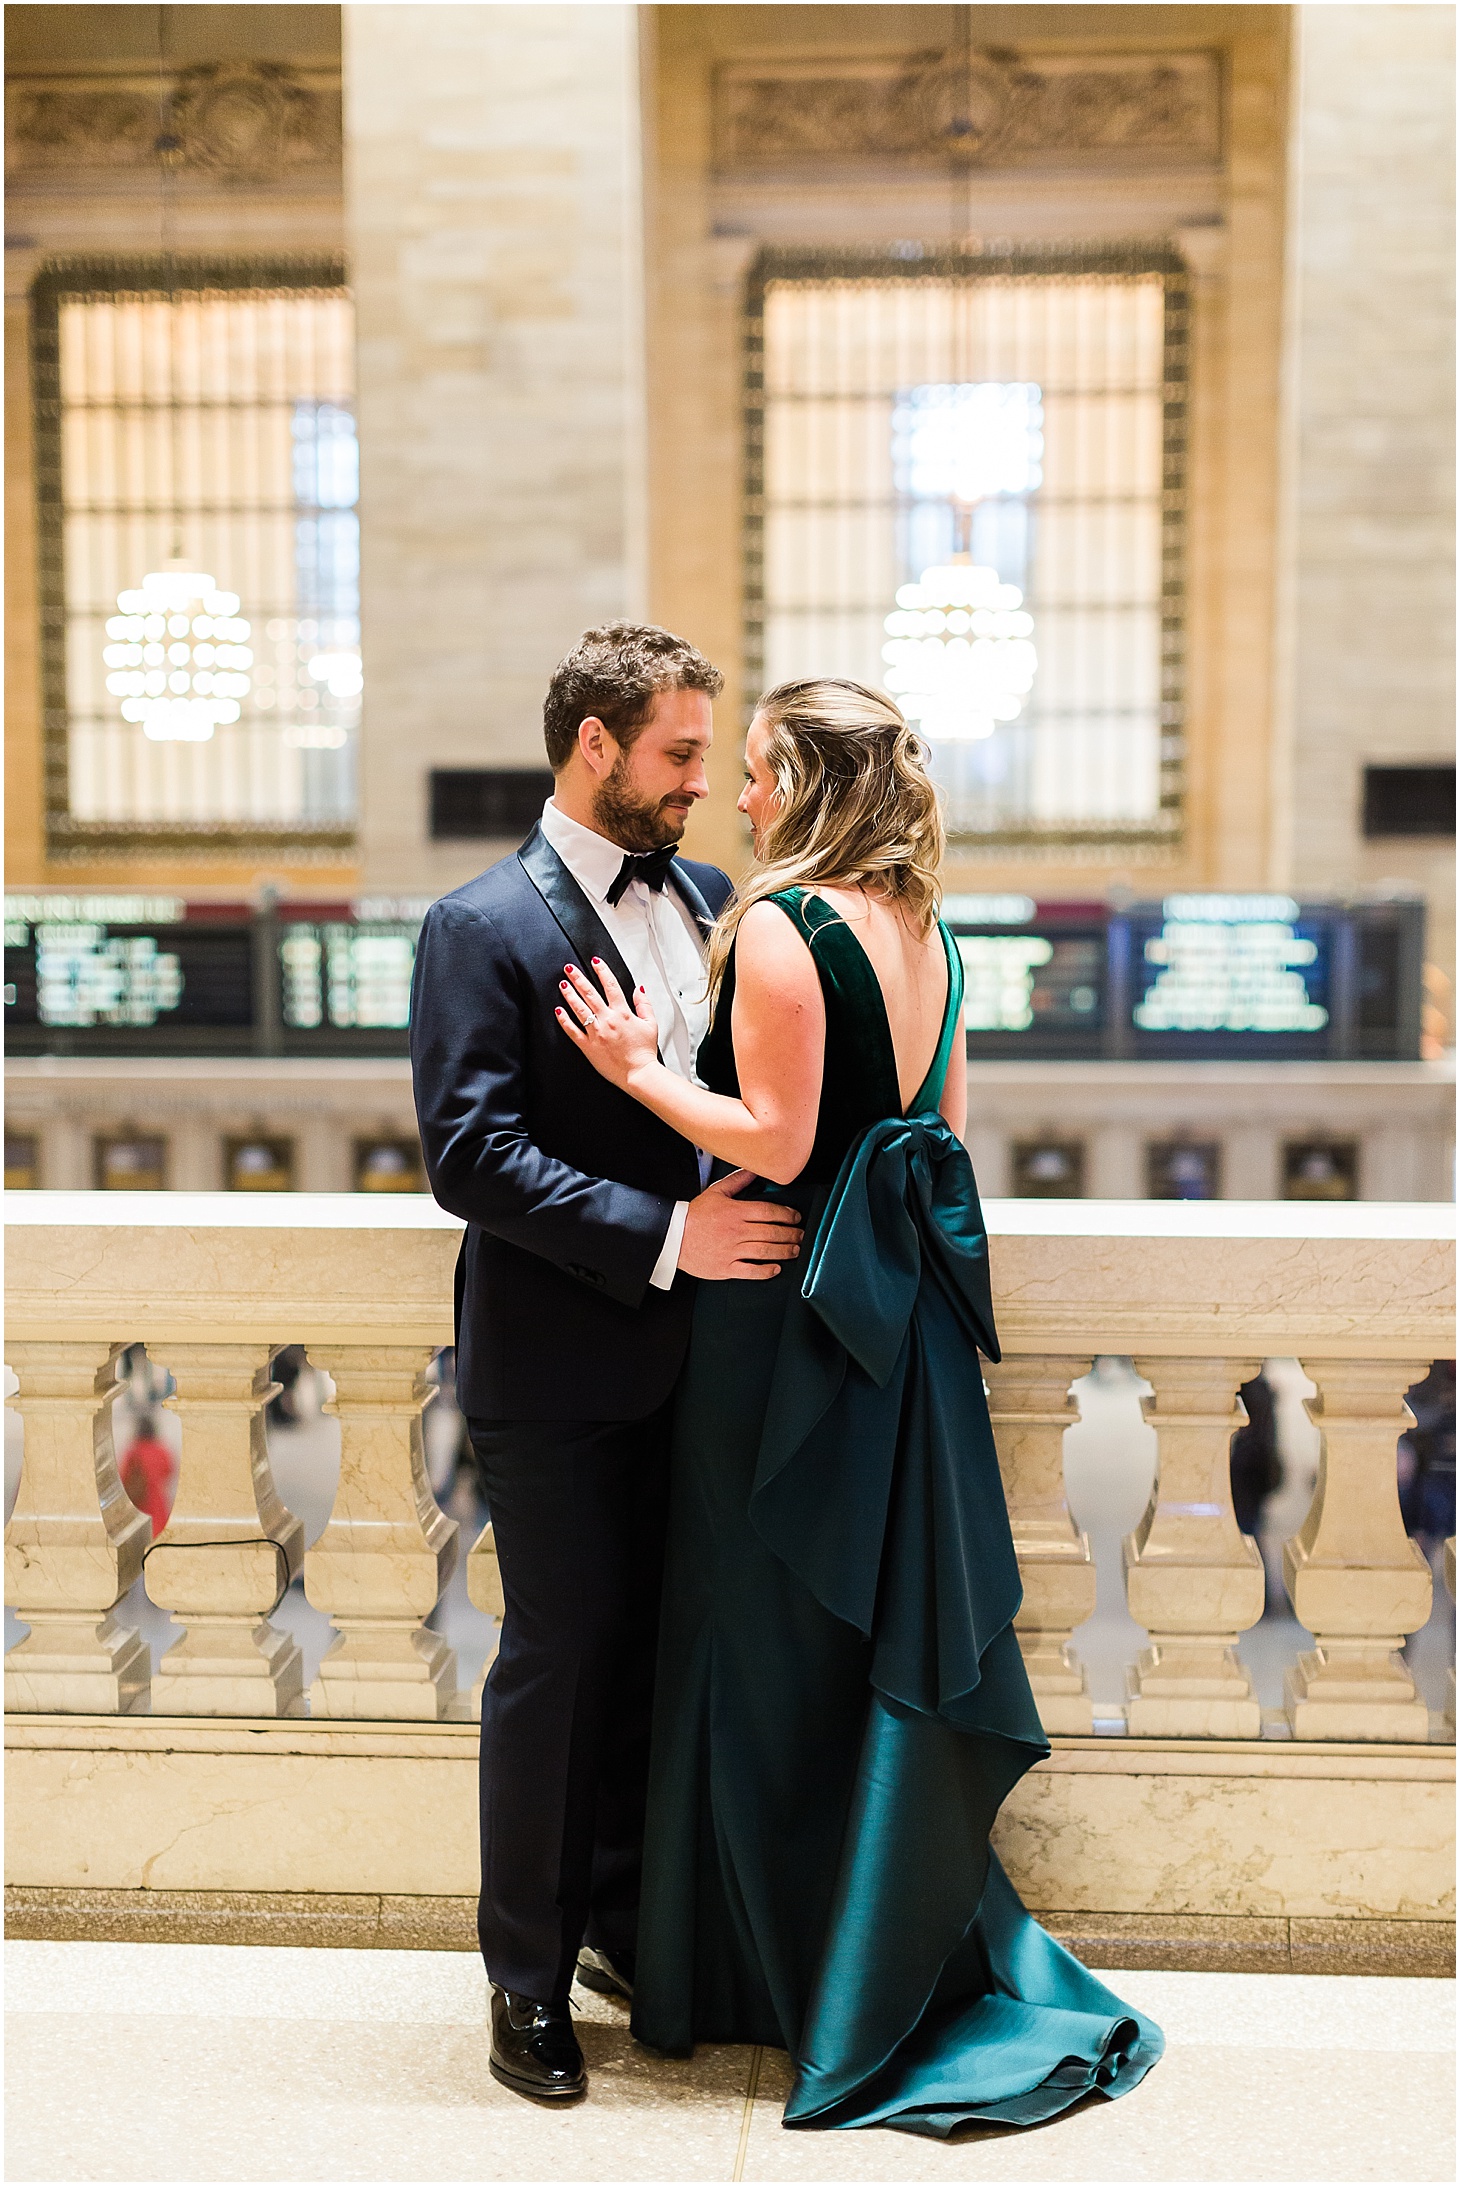 Engagement Portraits in Grand Central Station | Sunrise Engagement at the Brooklyn Bridge, Top of Rock, and Grand Central Station | Sarah Bradshaw Photography